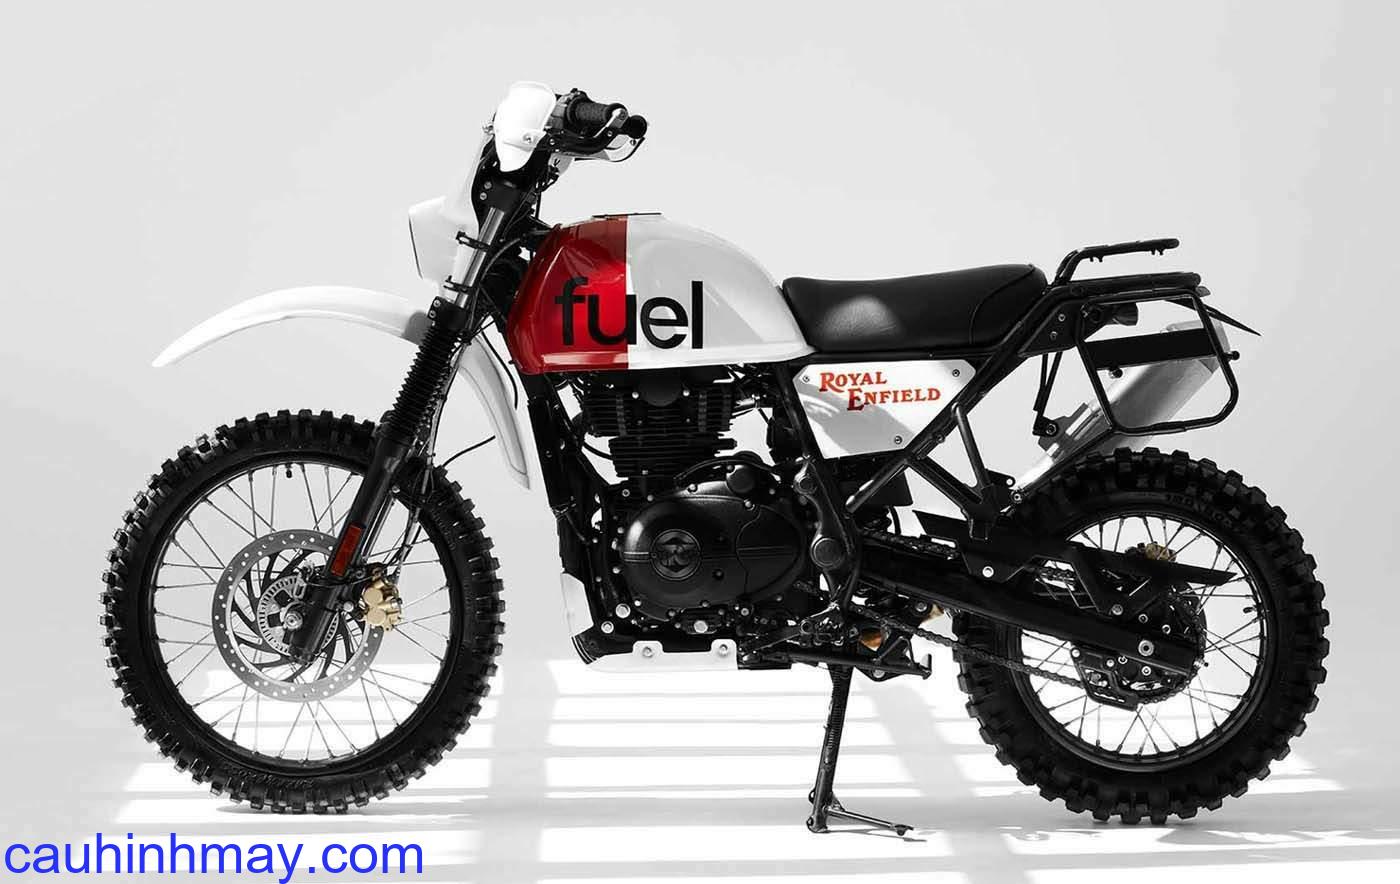 ROYAL RALLY 400 BY FUEL MOTORCYCLES